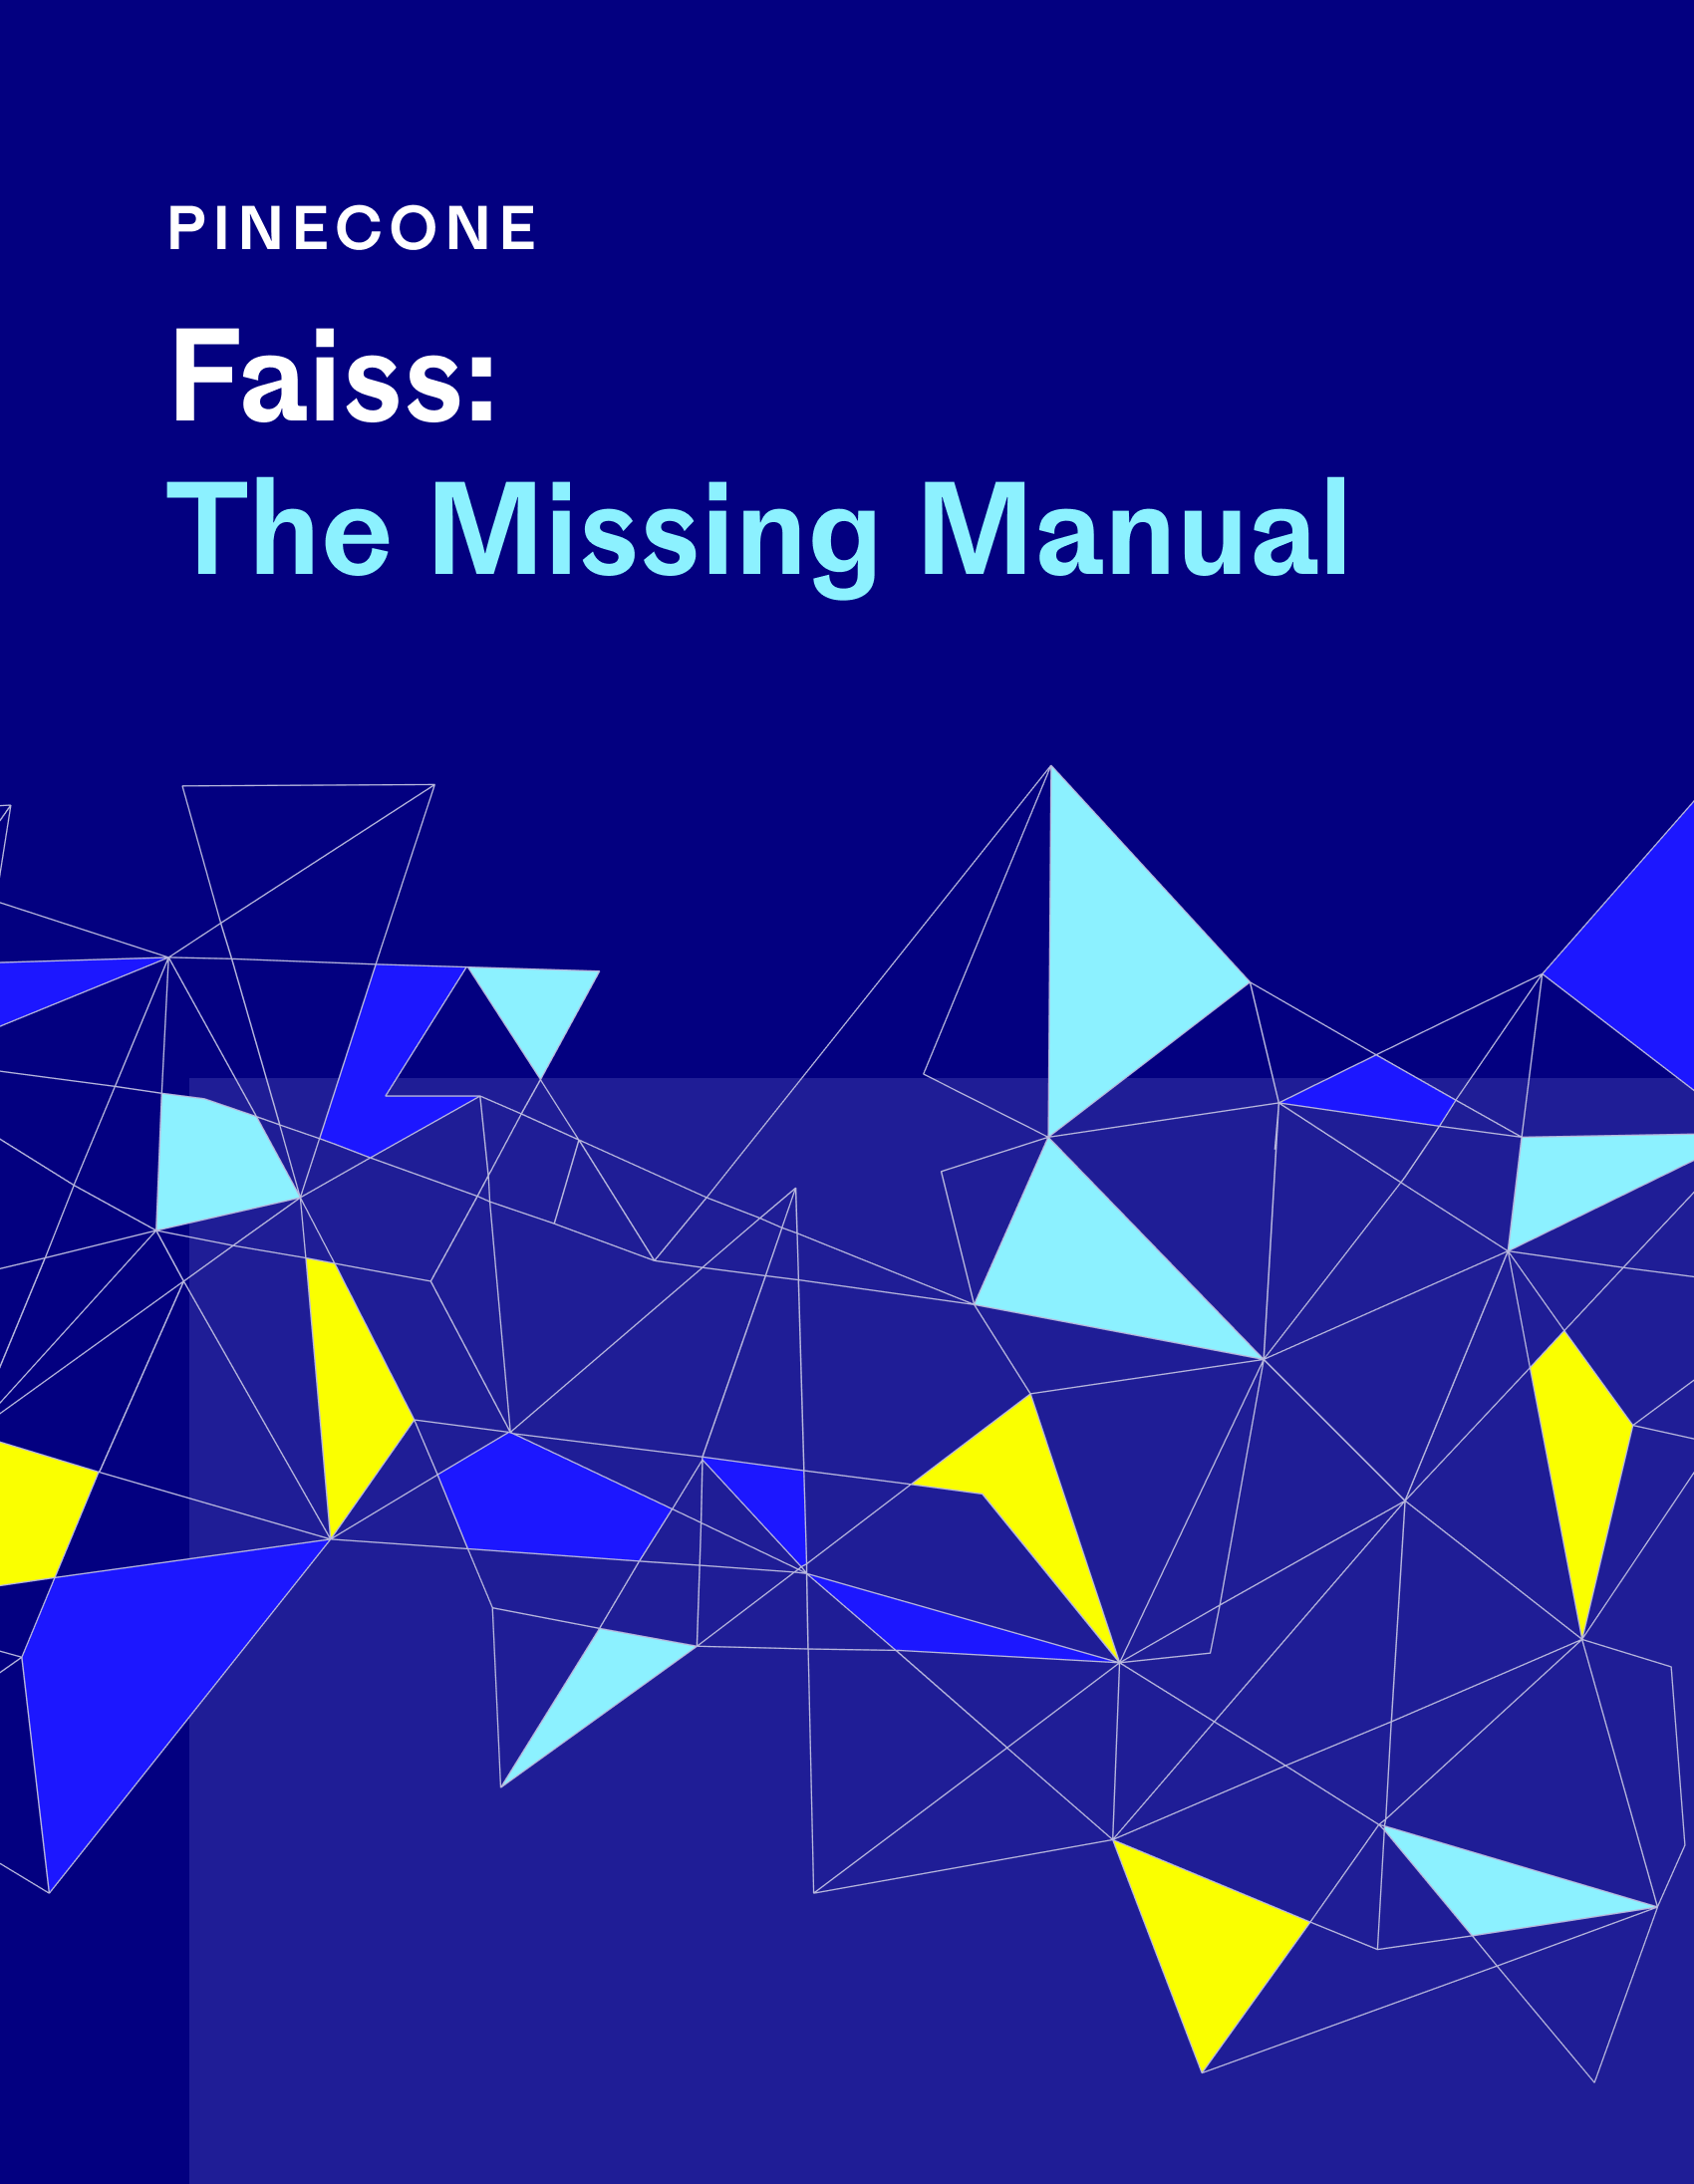 Faiss: The Missing Manual